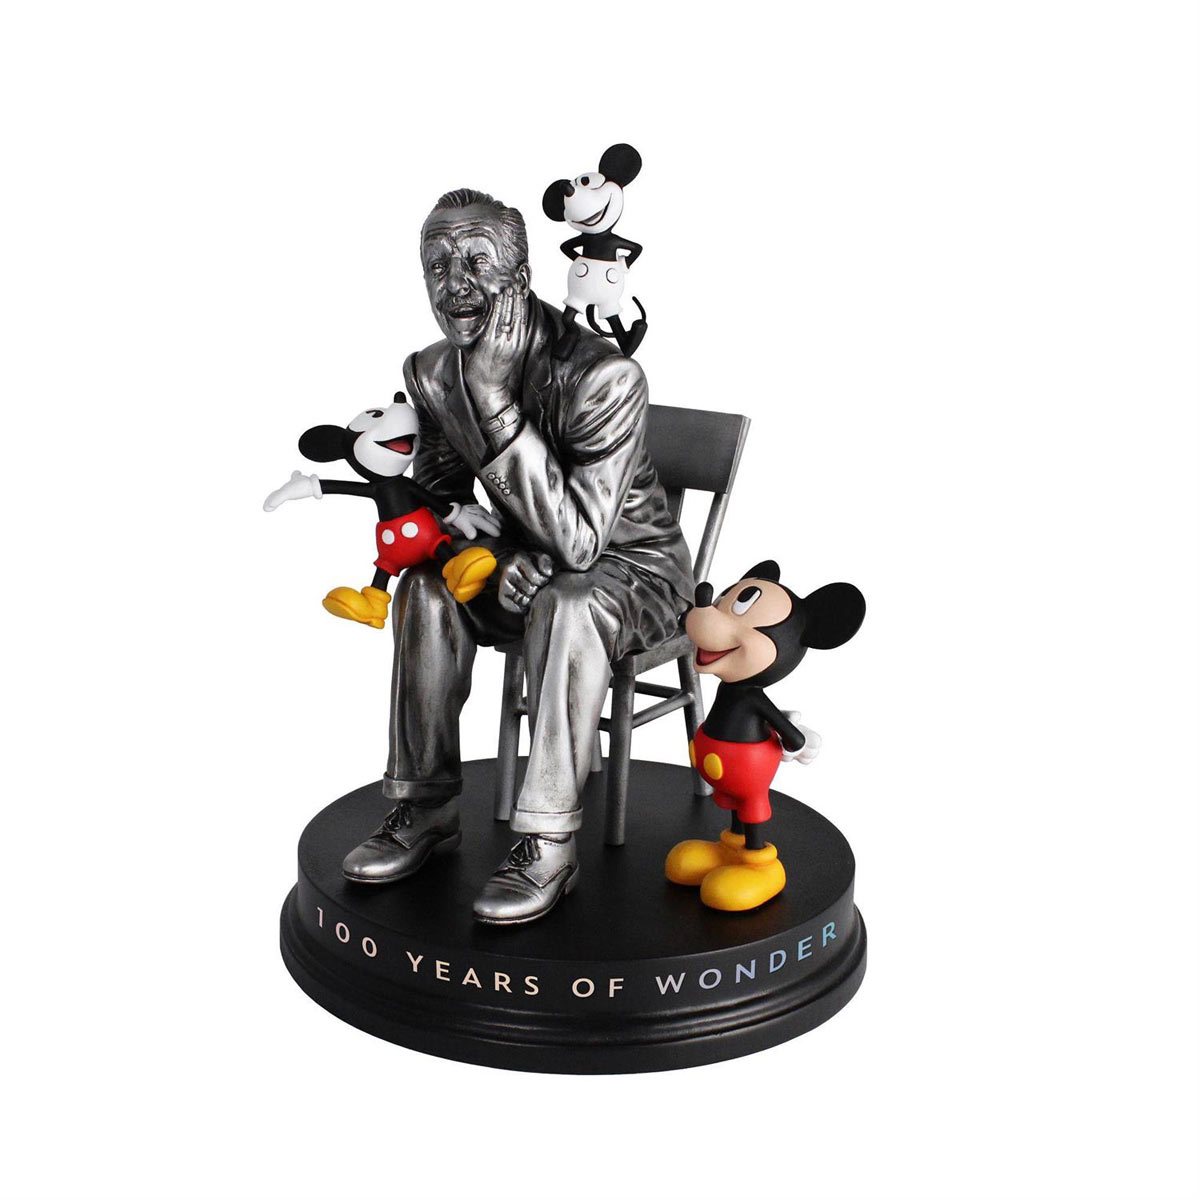 Disney Action Figures, Statues, Collectibles, and More!